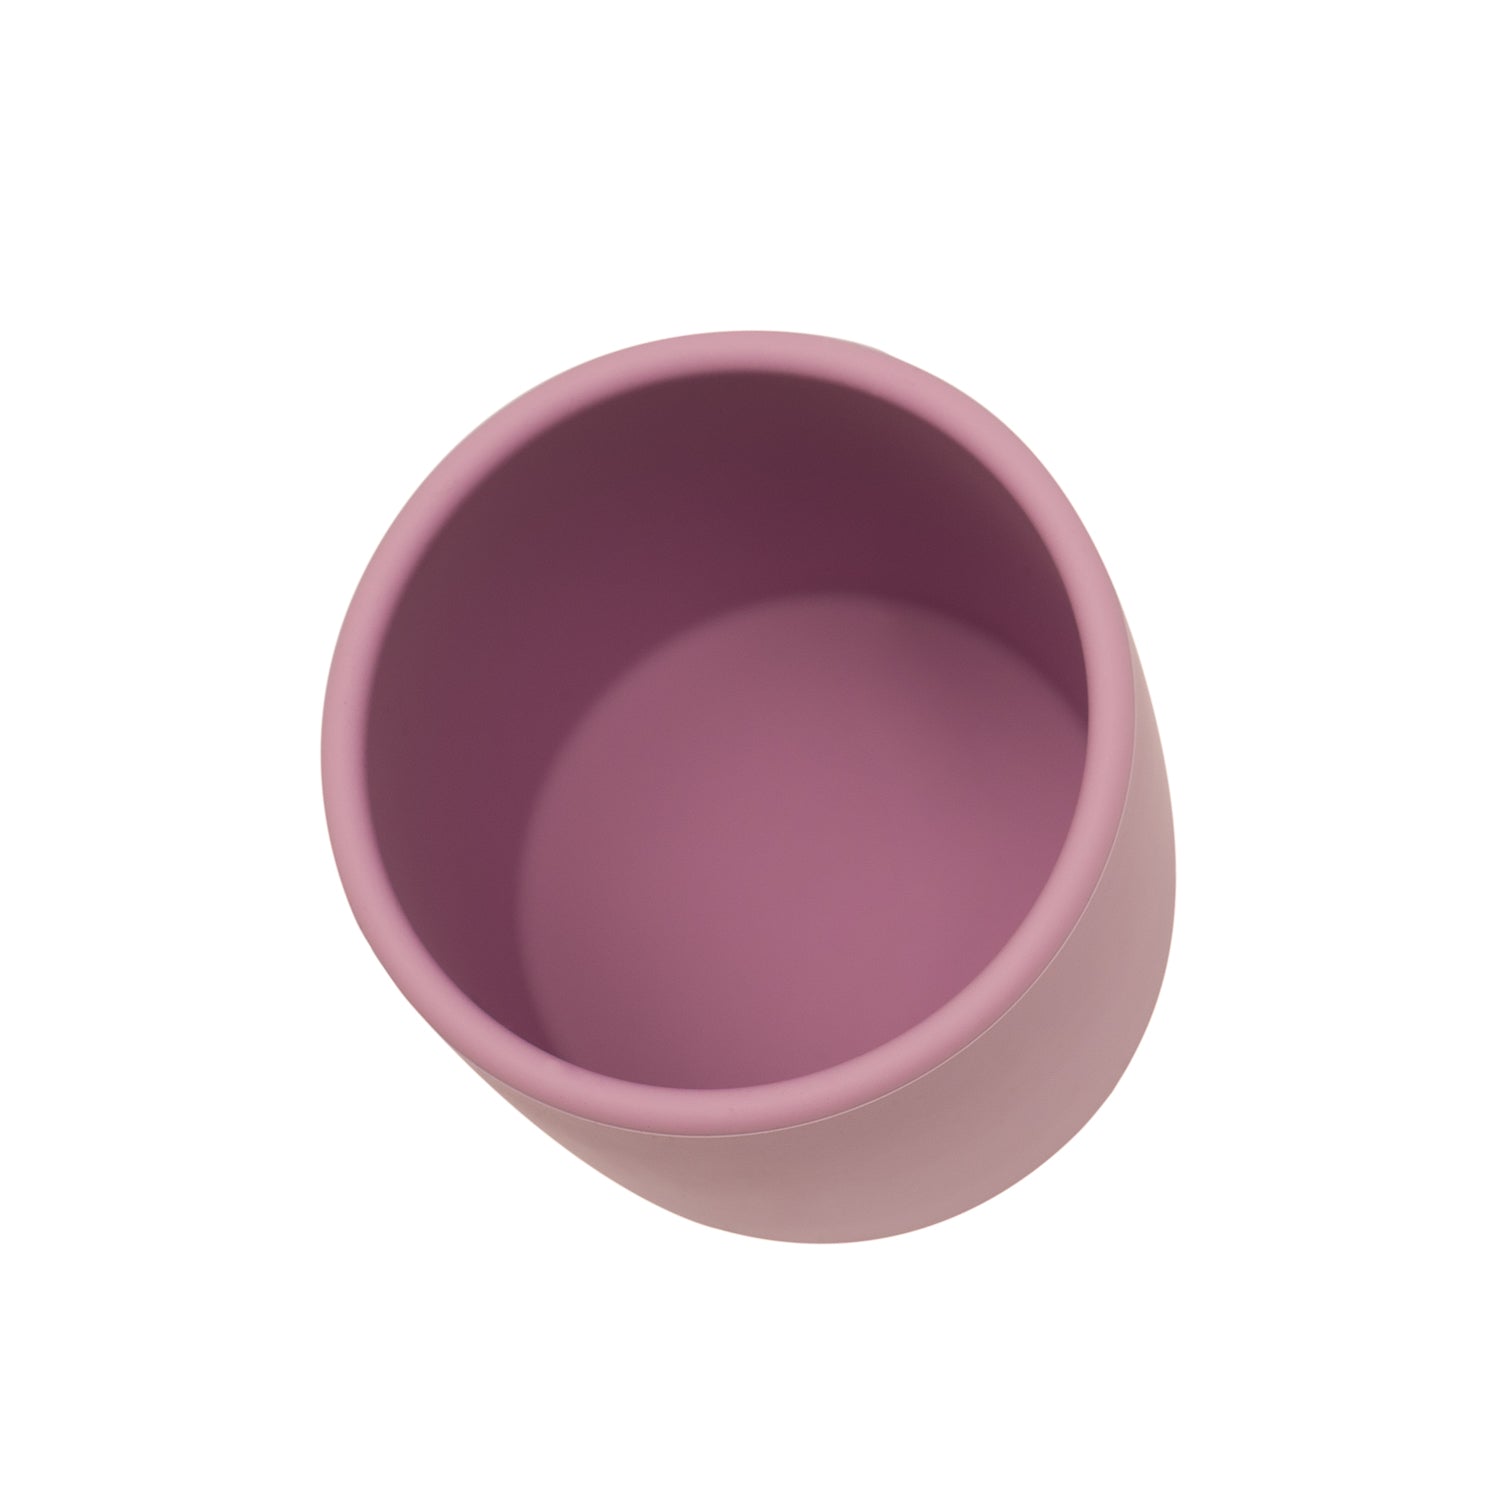 Silicone Grip Cup in Dusty Rose